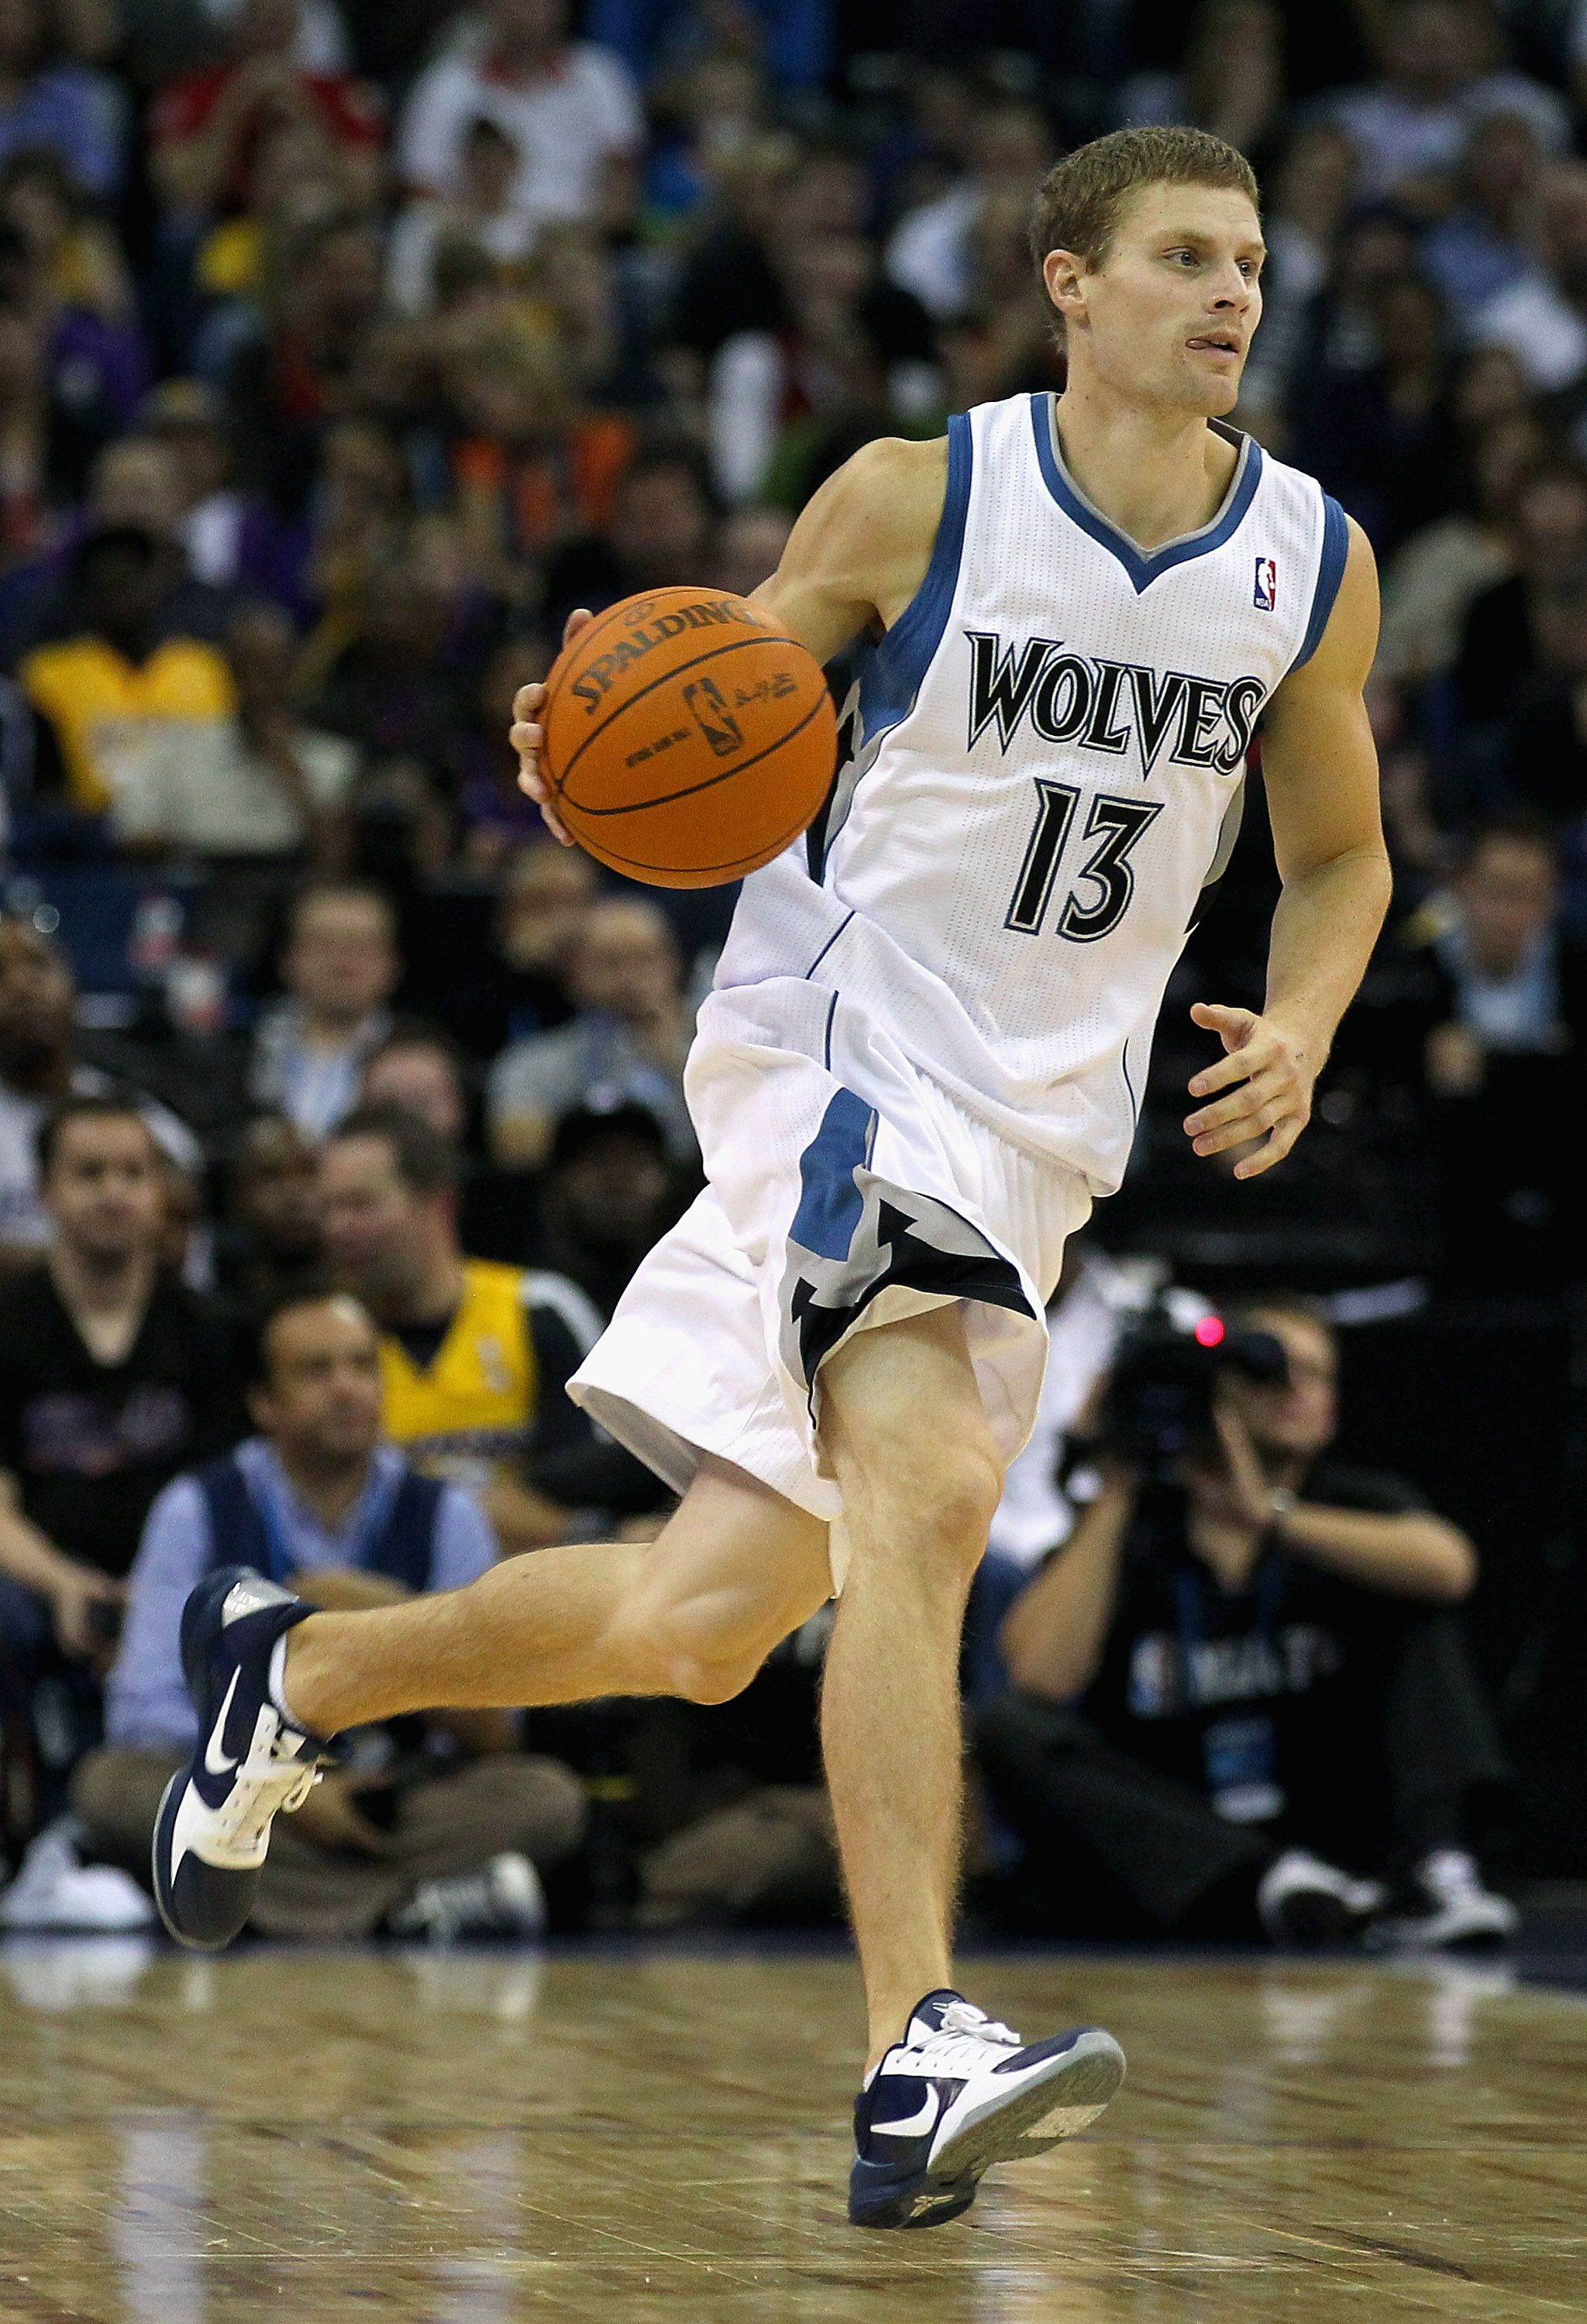 LONDON, ENGLAND - OCTOBER 04:  Luke Ridnour of the Minnesota Timberwolves in action during the NBA Europe Live match between the Los Angeles Lakers and the Minnesota Timberwolves at the O2 arena on October 4, 2010 in London, England.  (Photo by Clive Rose